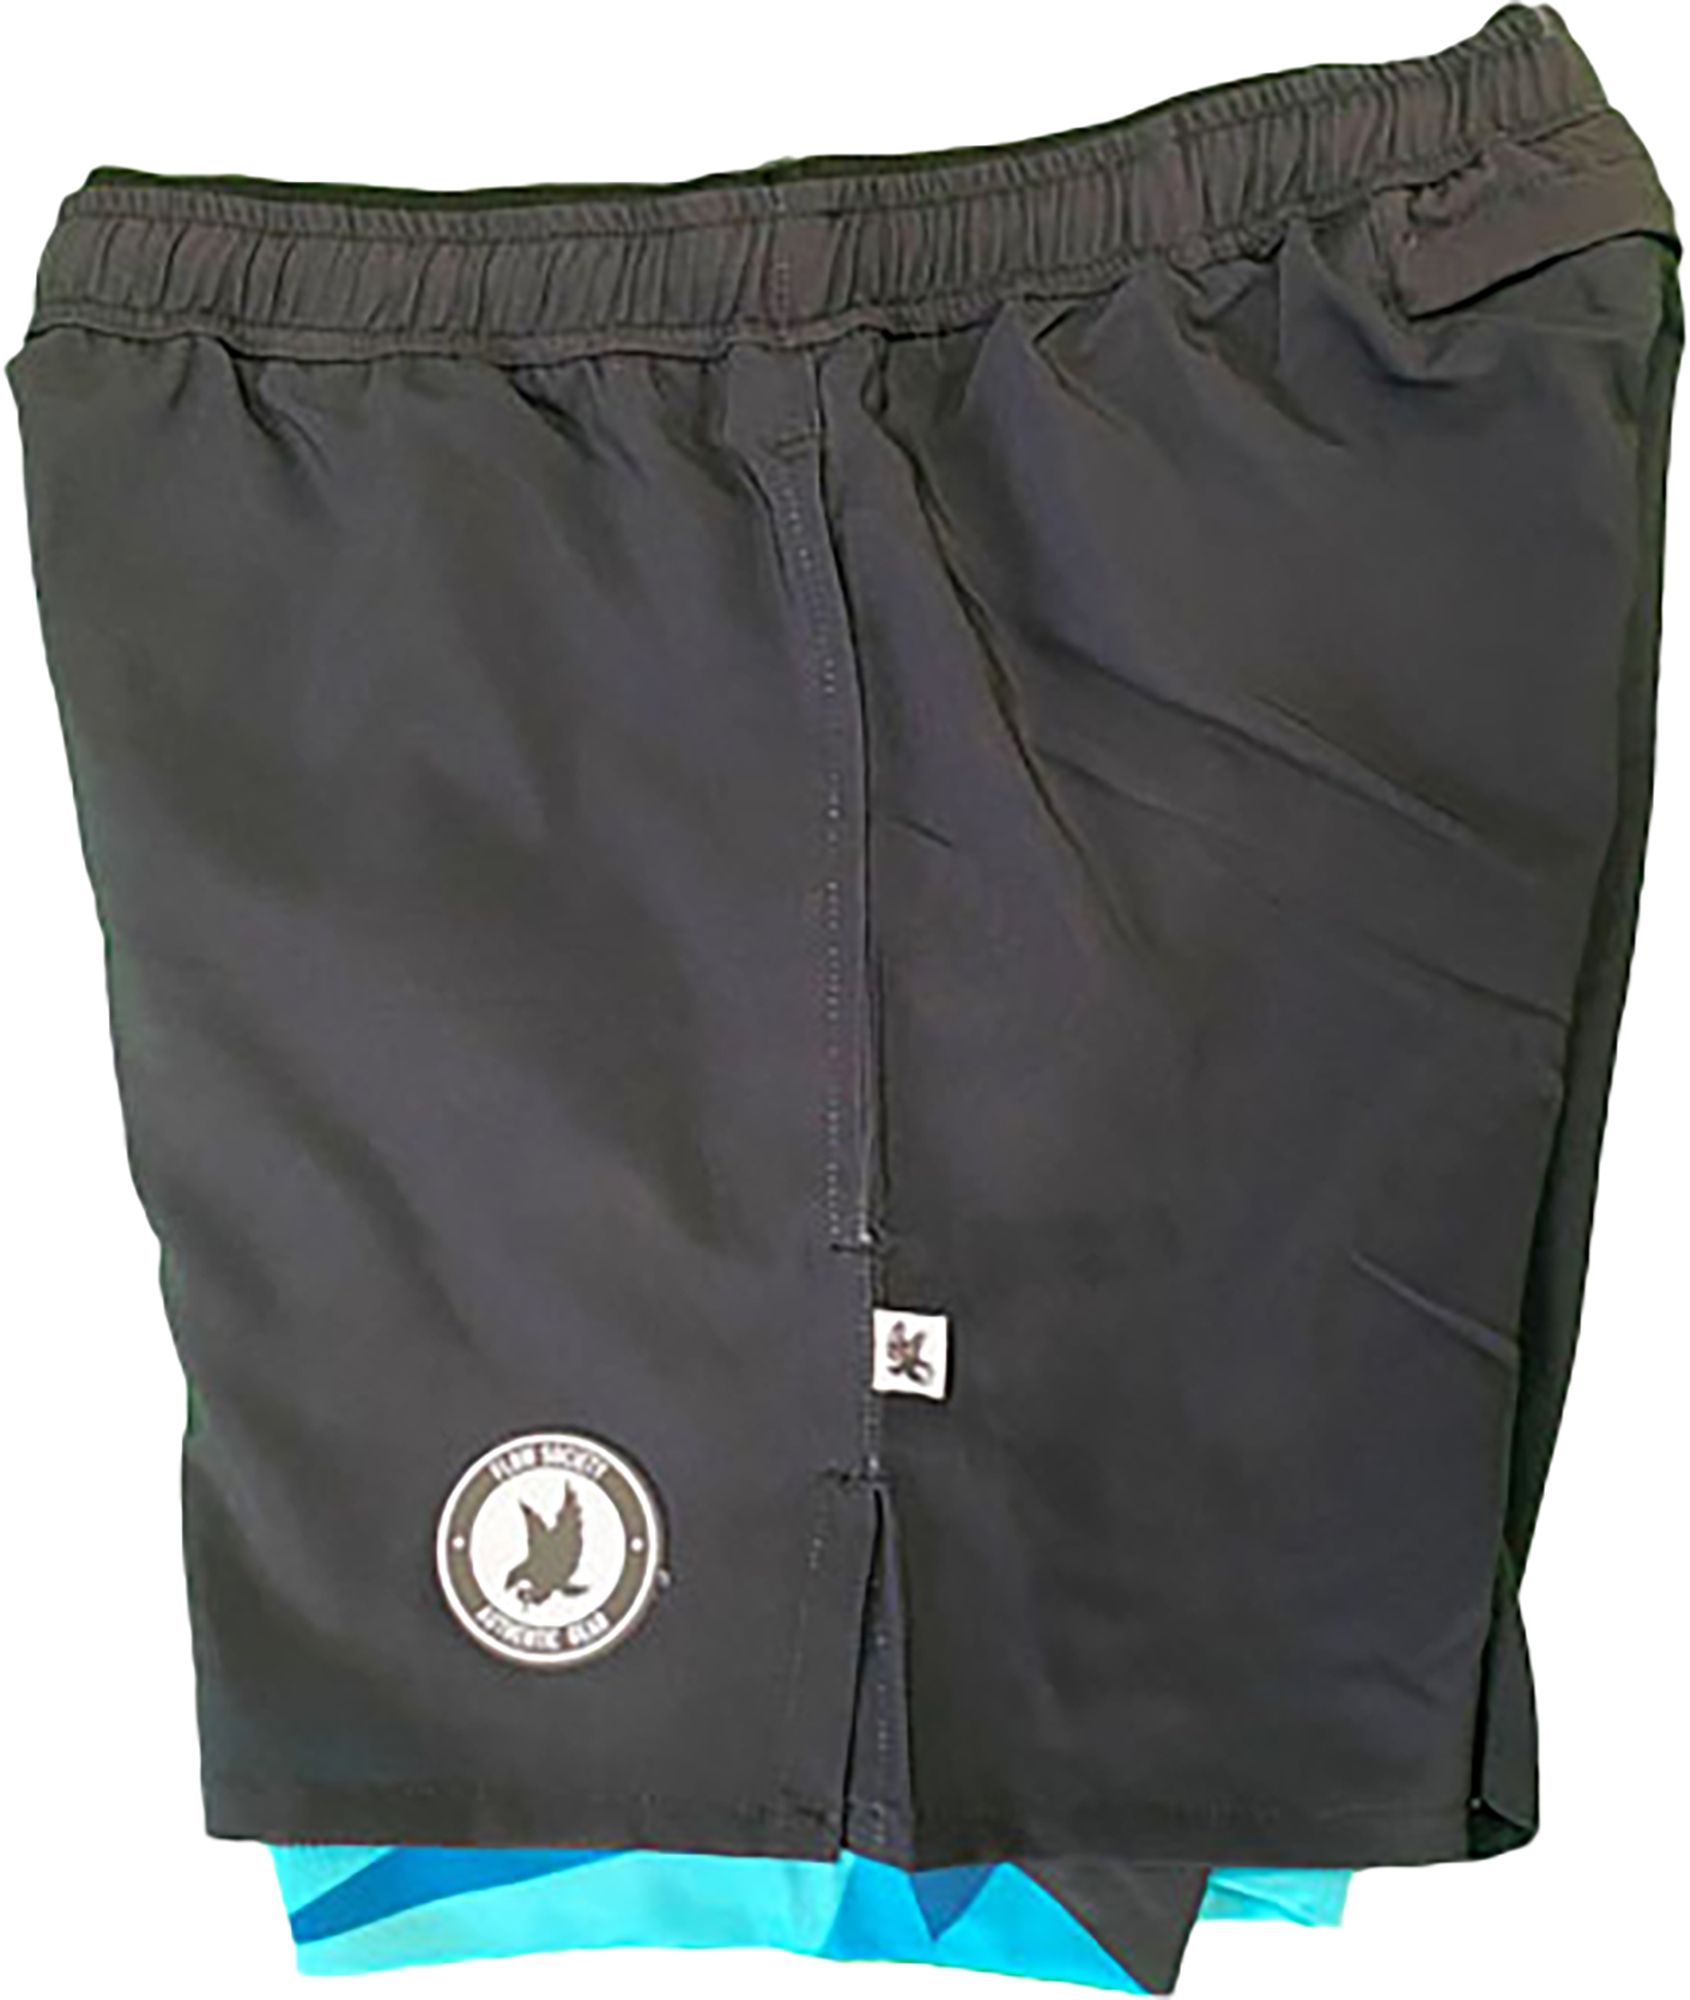 Flow Society Men's 2-1 7" Compression Shorts